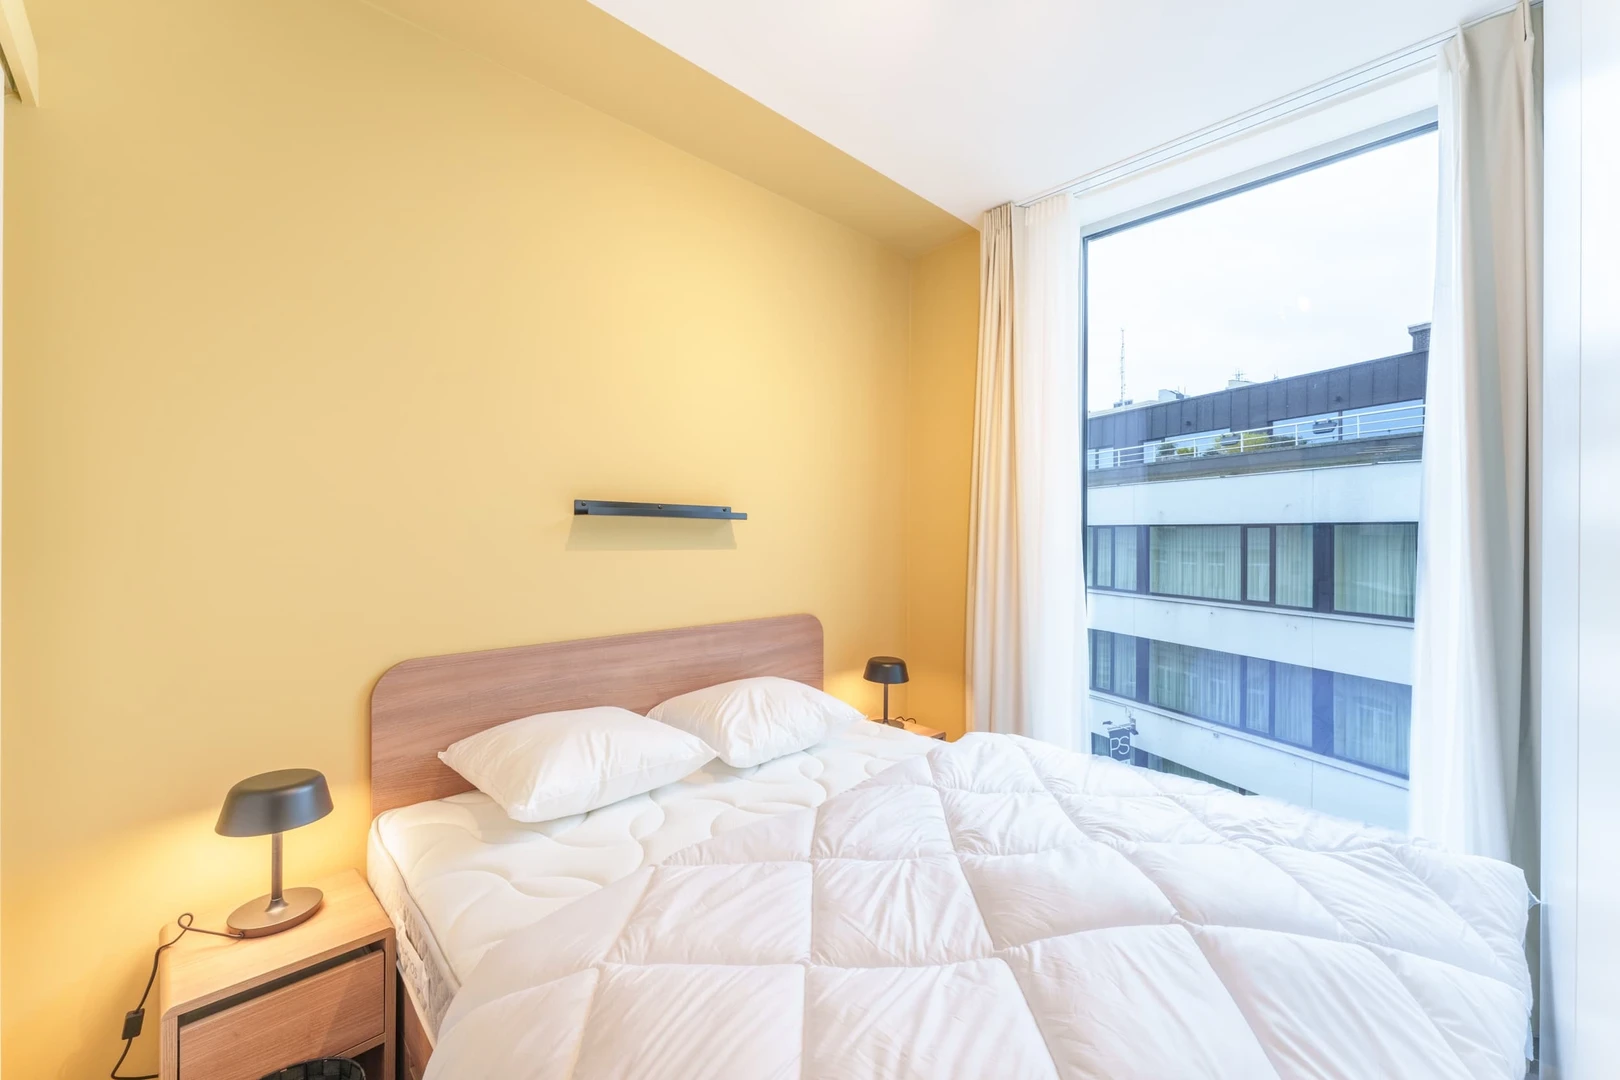 Cheap private room in Antwerp